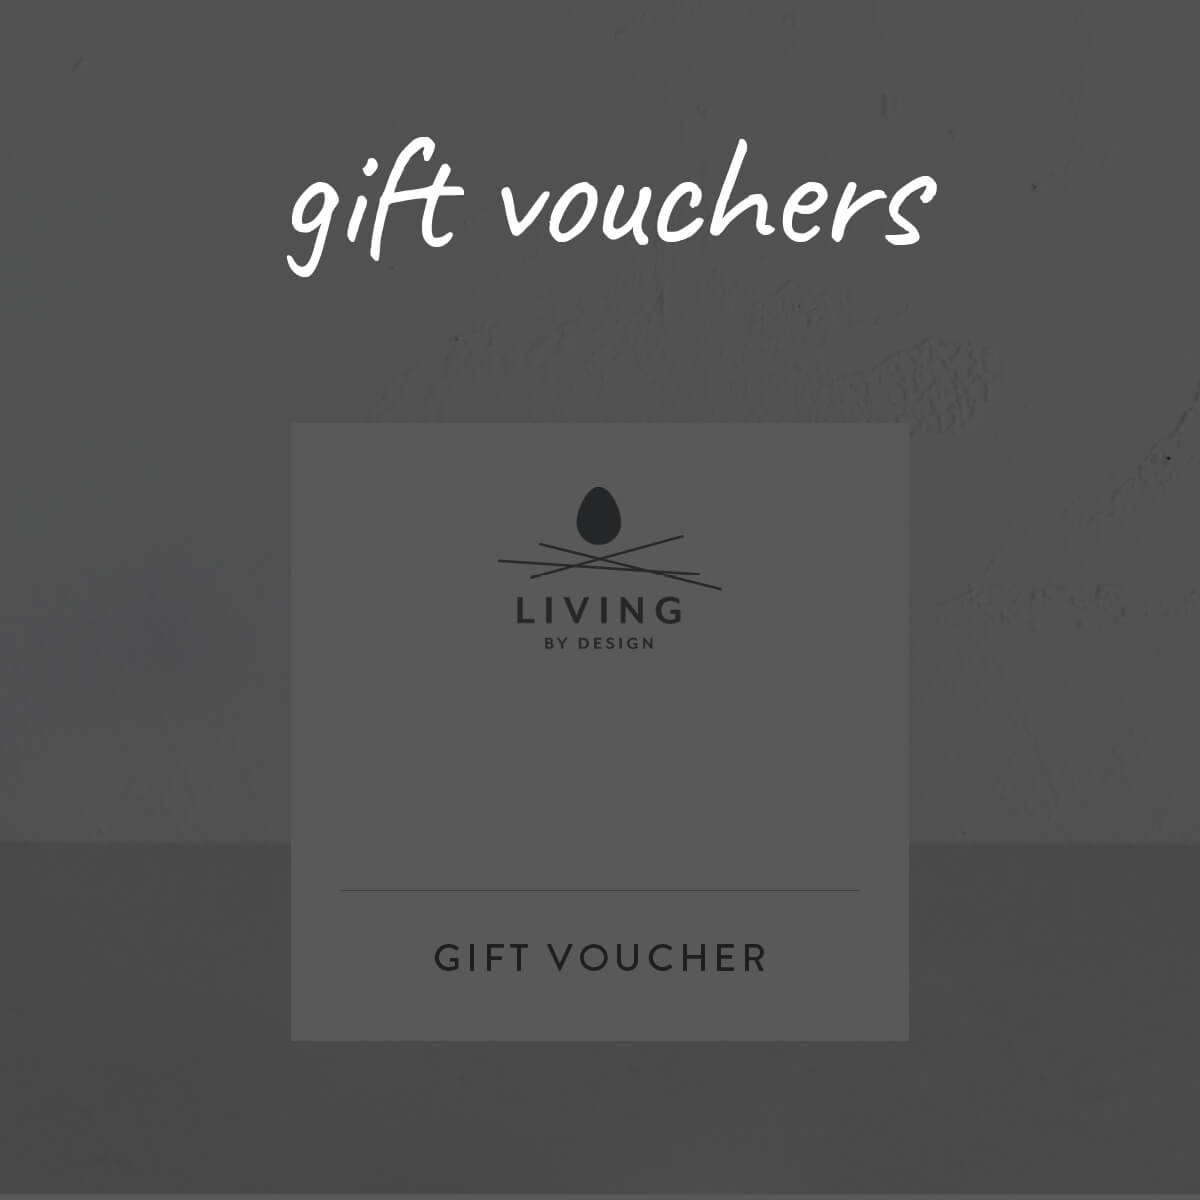 GIFT VOUCHERS  |  LIVING BY DESIGN